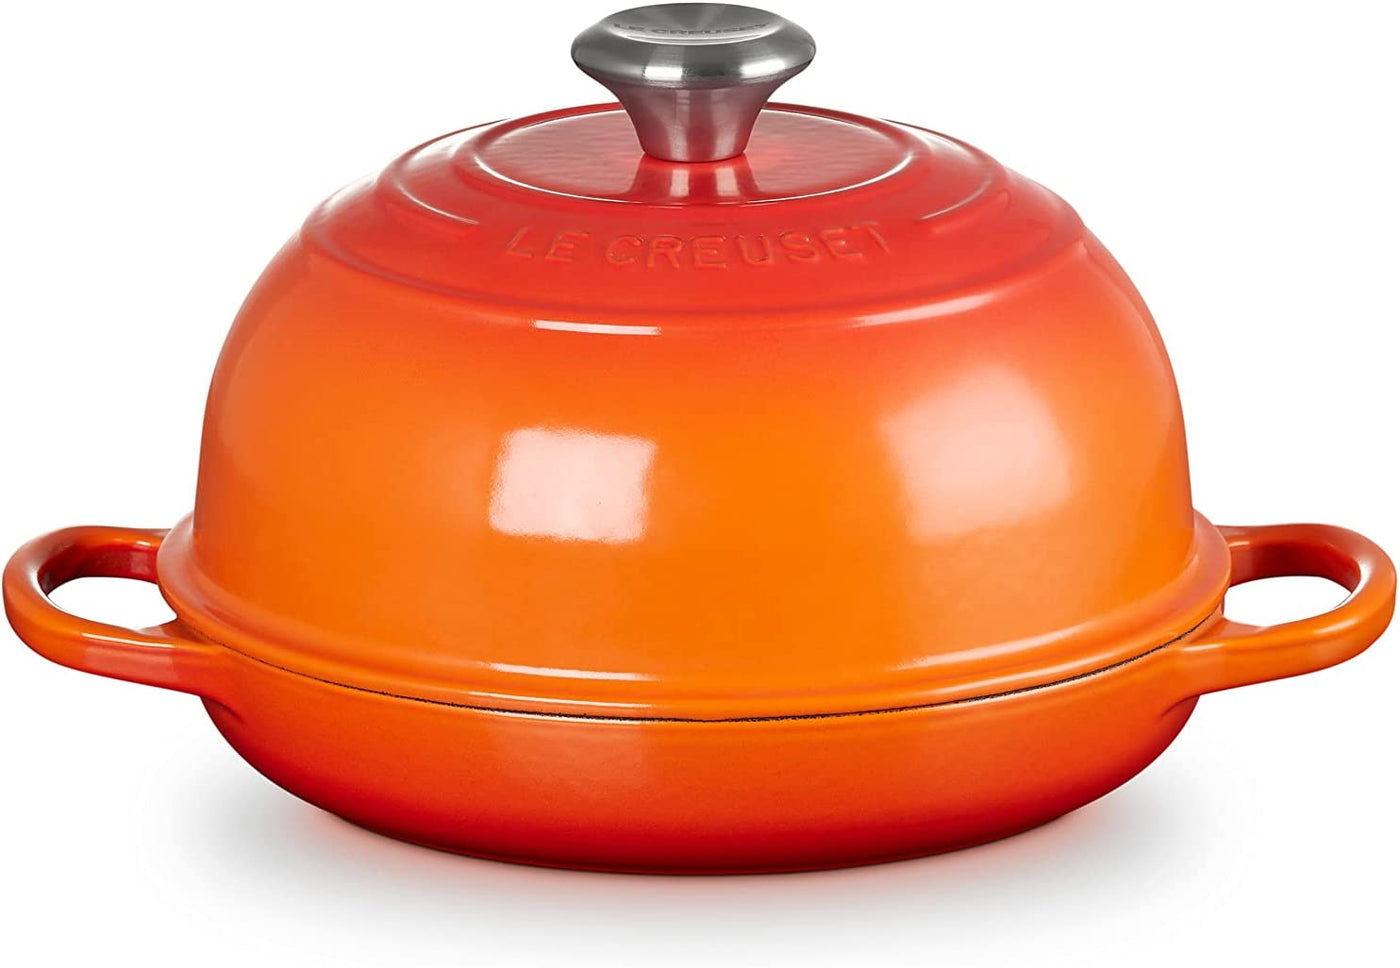  Le Creuset Enameled Cast Iron Bread Oven, Exclusive